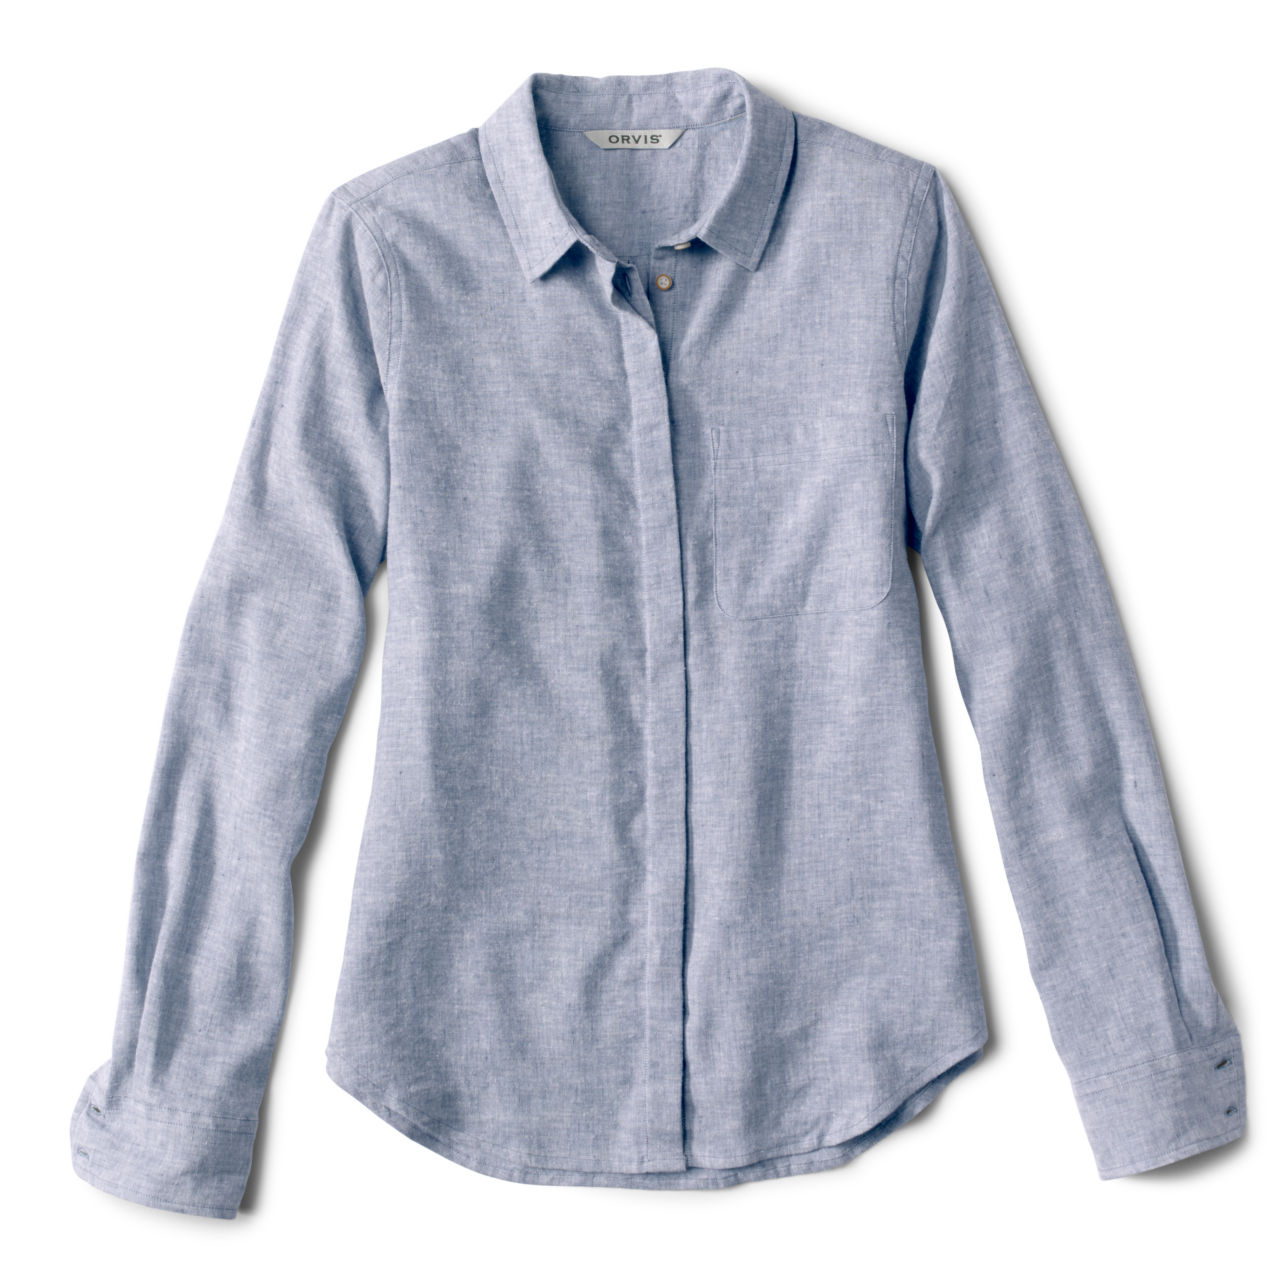 Performance Linen Long-Sleeved Shirt - DUSTY BLUE CHAMBRAY image number 4